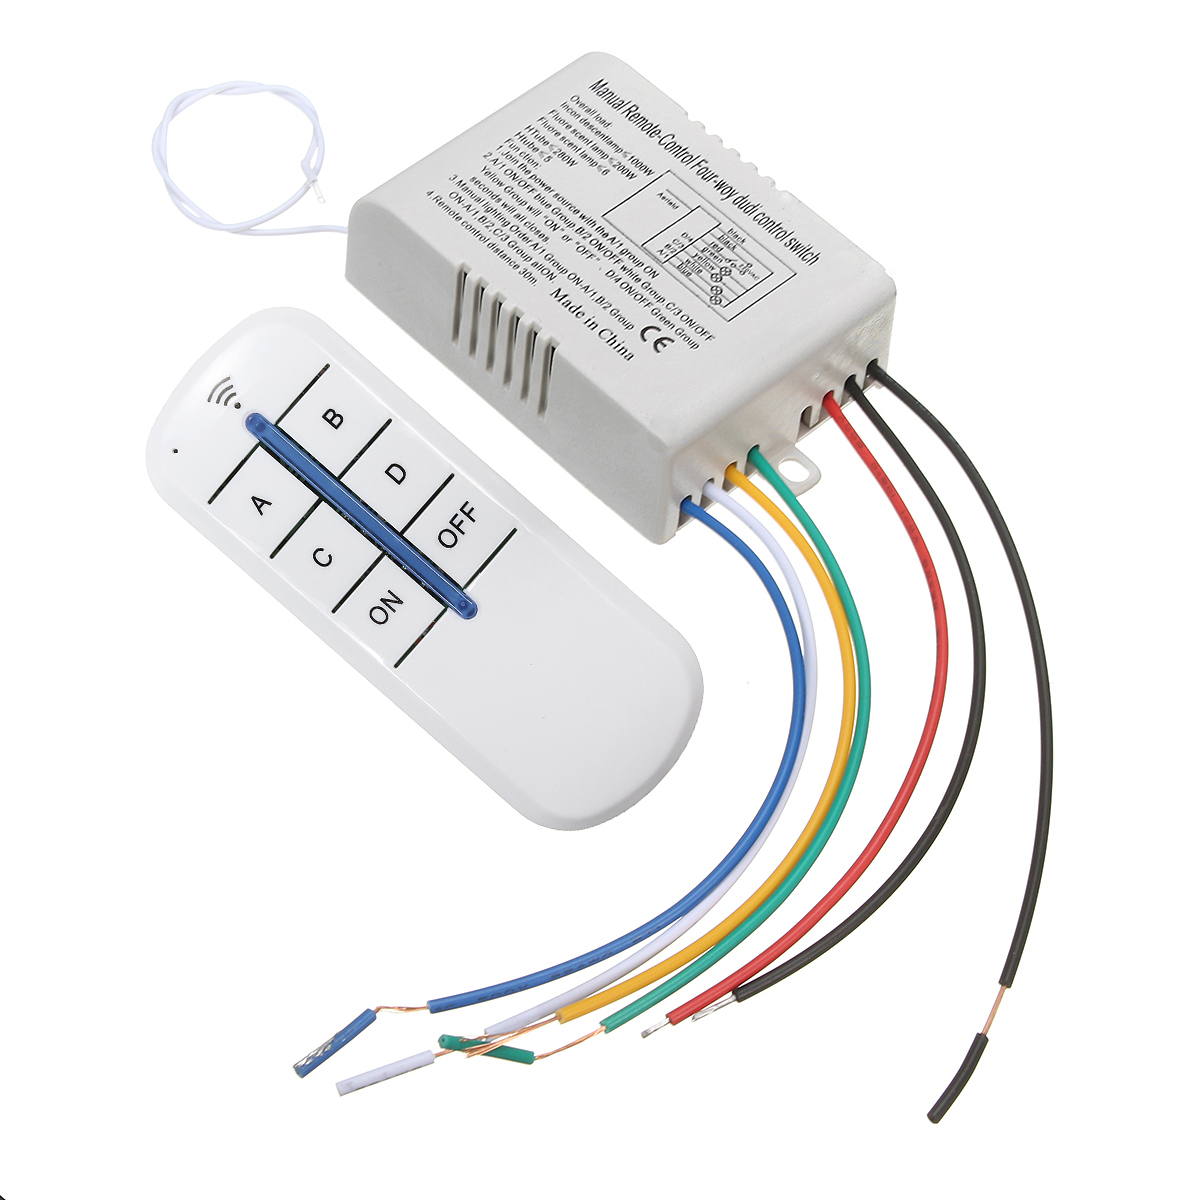 4-Channel-Wireless-Wall-Lamp-Switch-Splitter-Remote-Control-Receiver-Transmitter-1160207-1